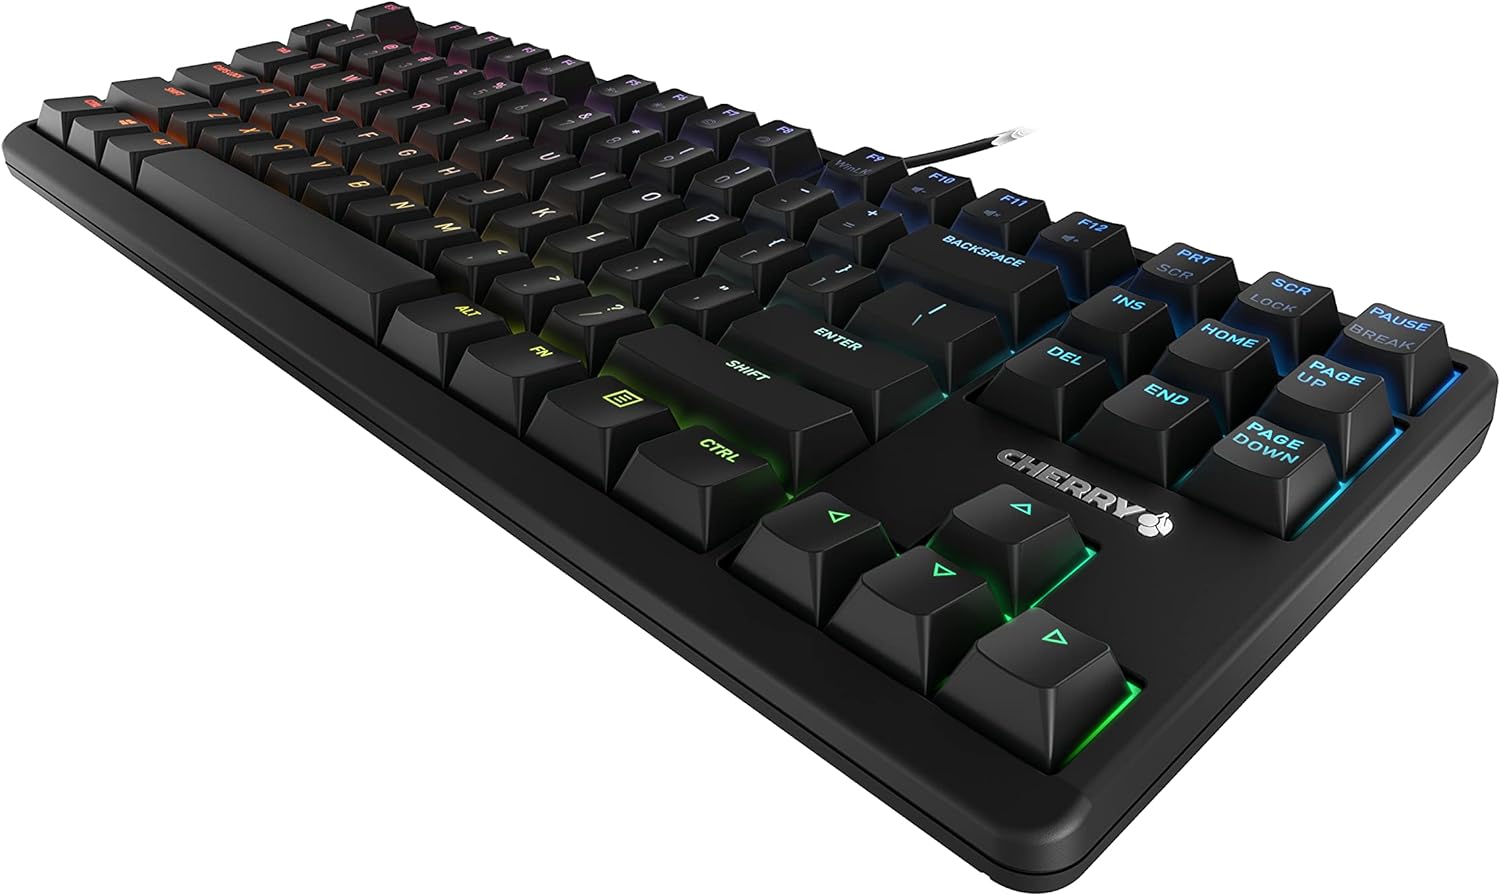 RGB Mechanical Keyboard with MX Red Silent Gold-Crosspoint Key switches